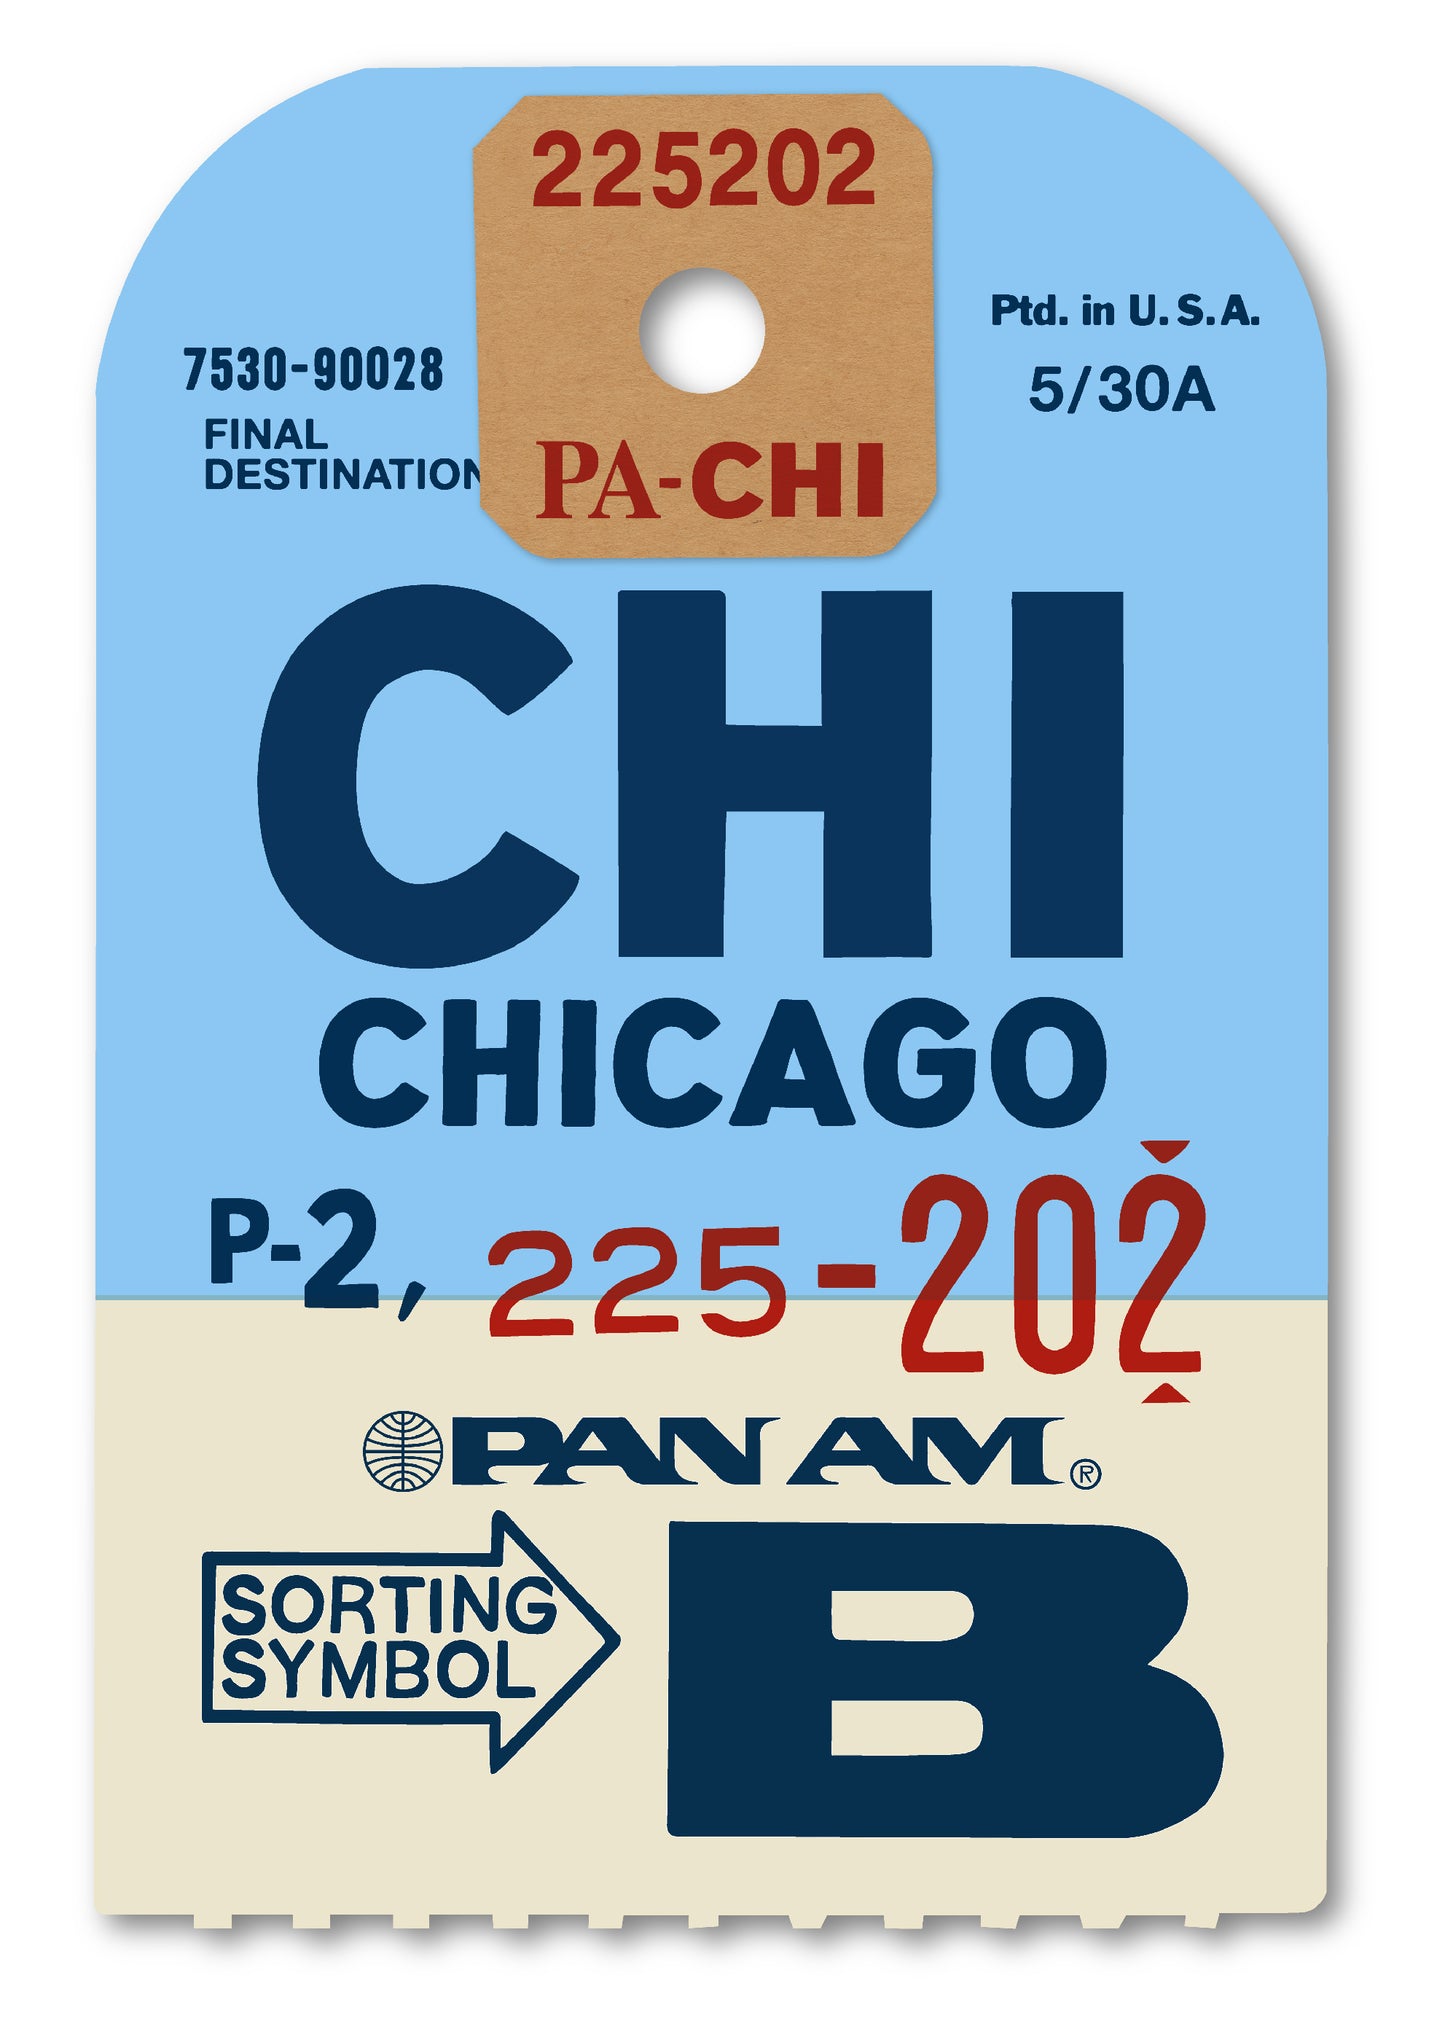 PAN AM ‘CHICAGO’ LUGGAGE TAG